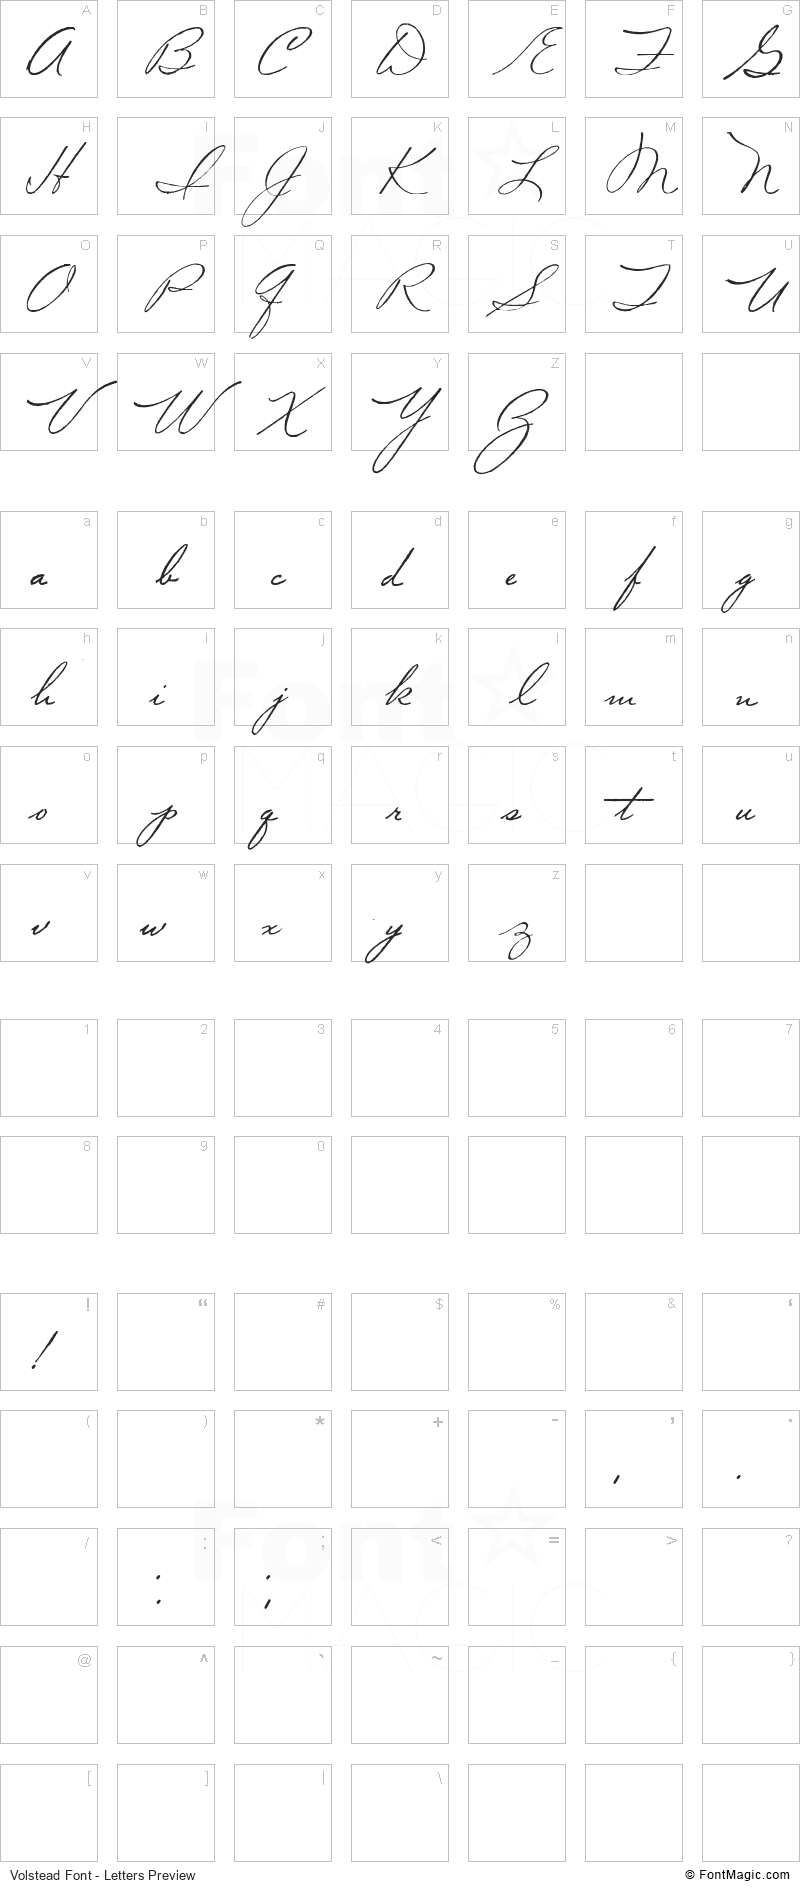 Volstead Font - All Latters Preview Chart